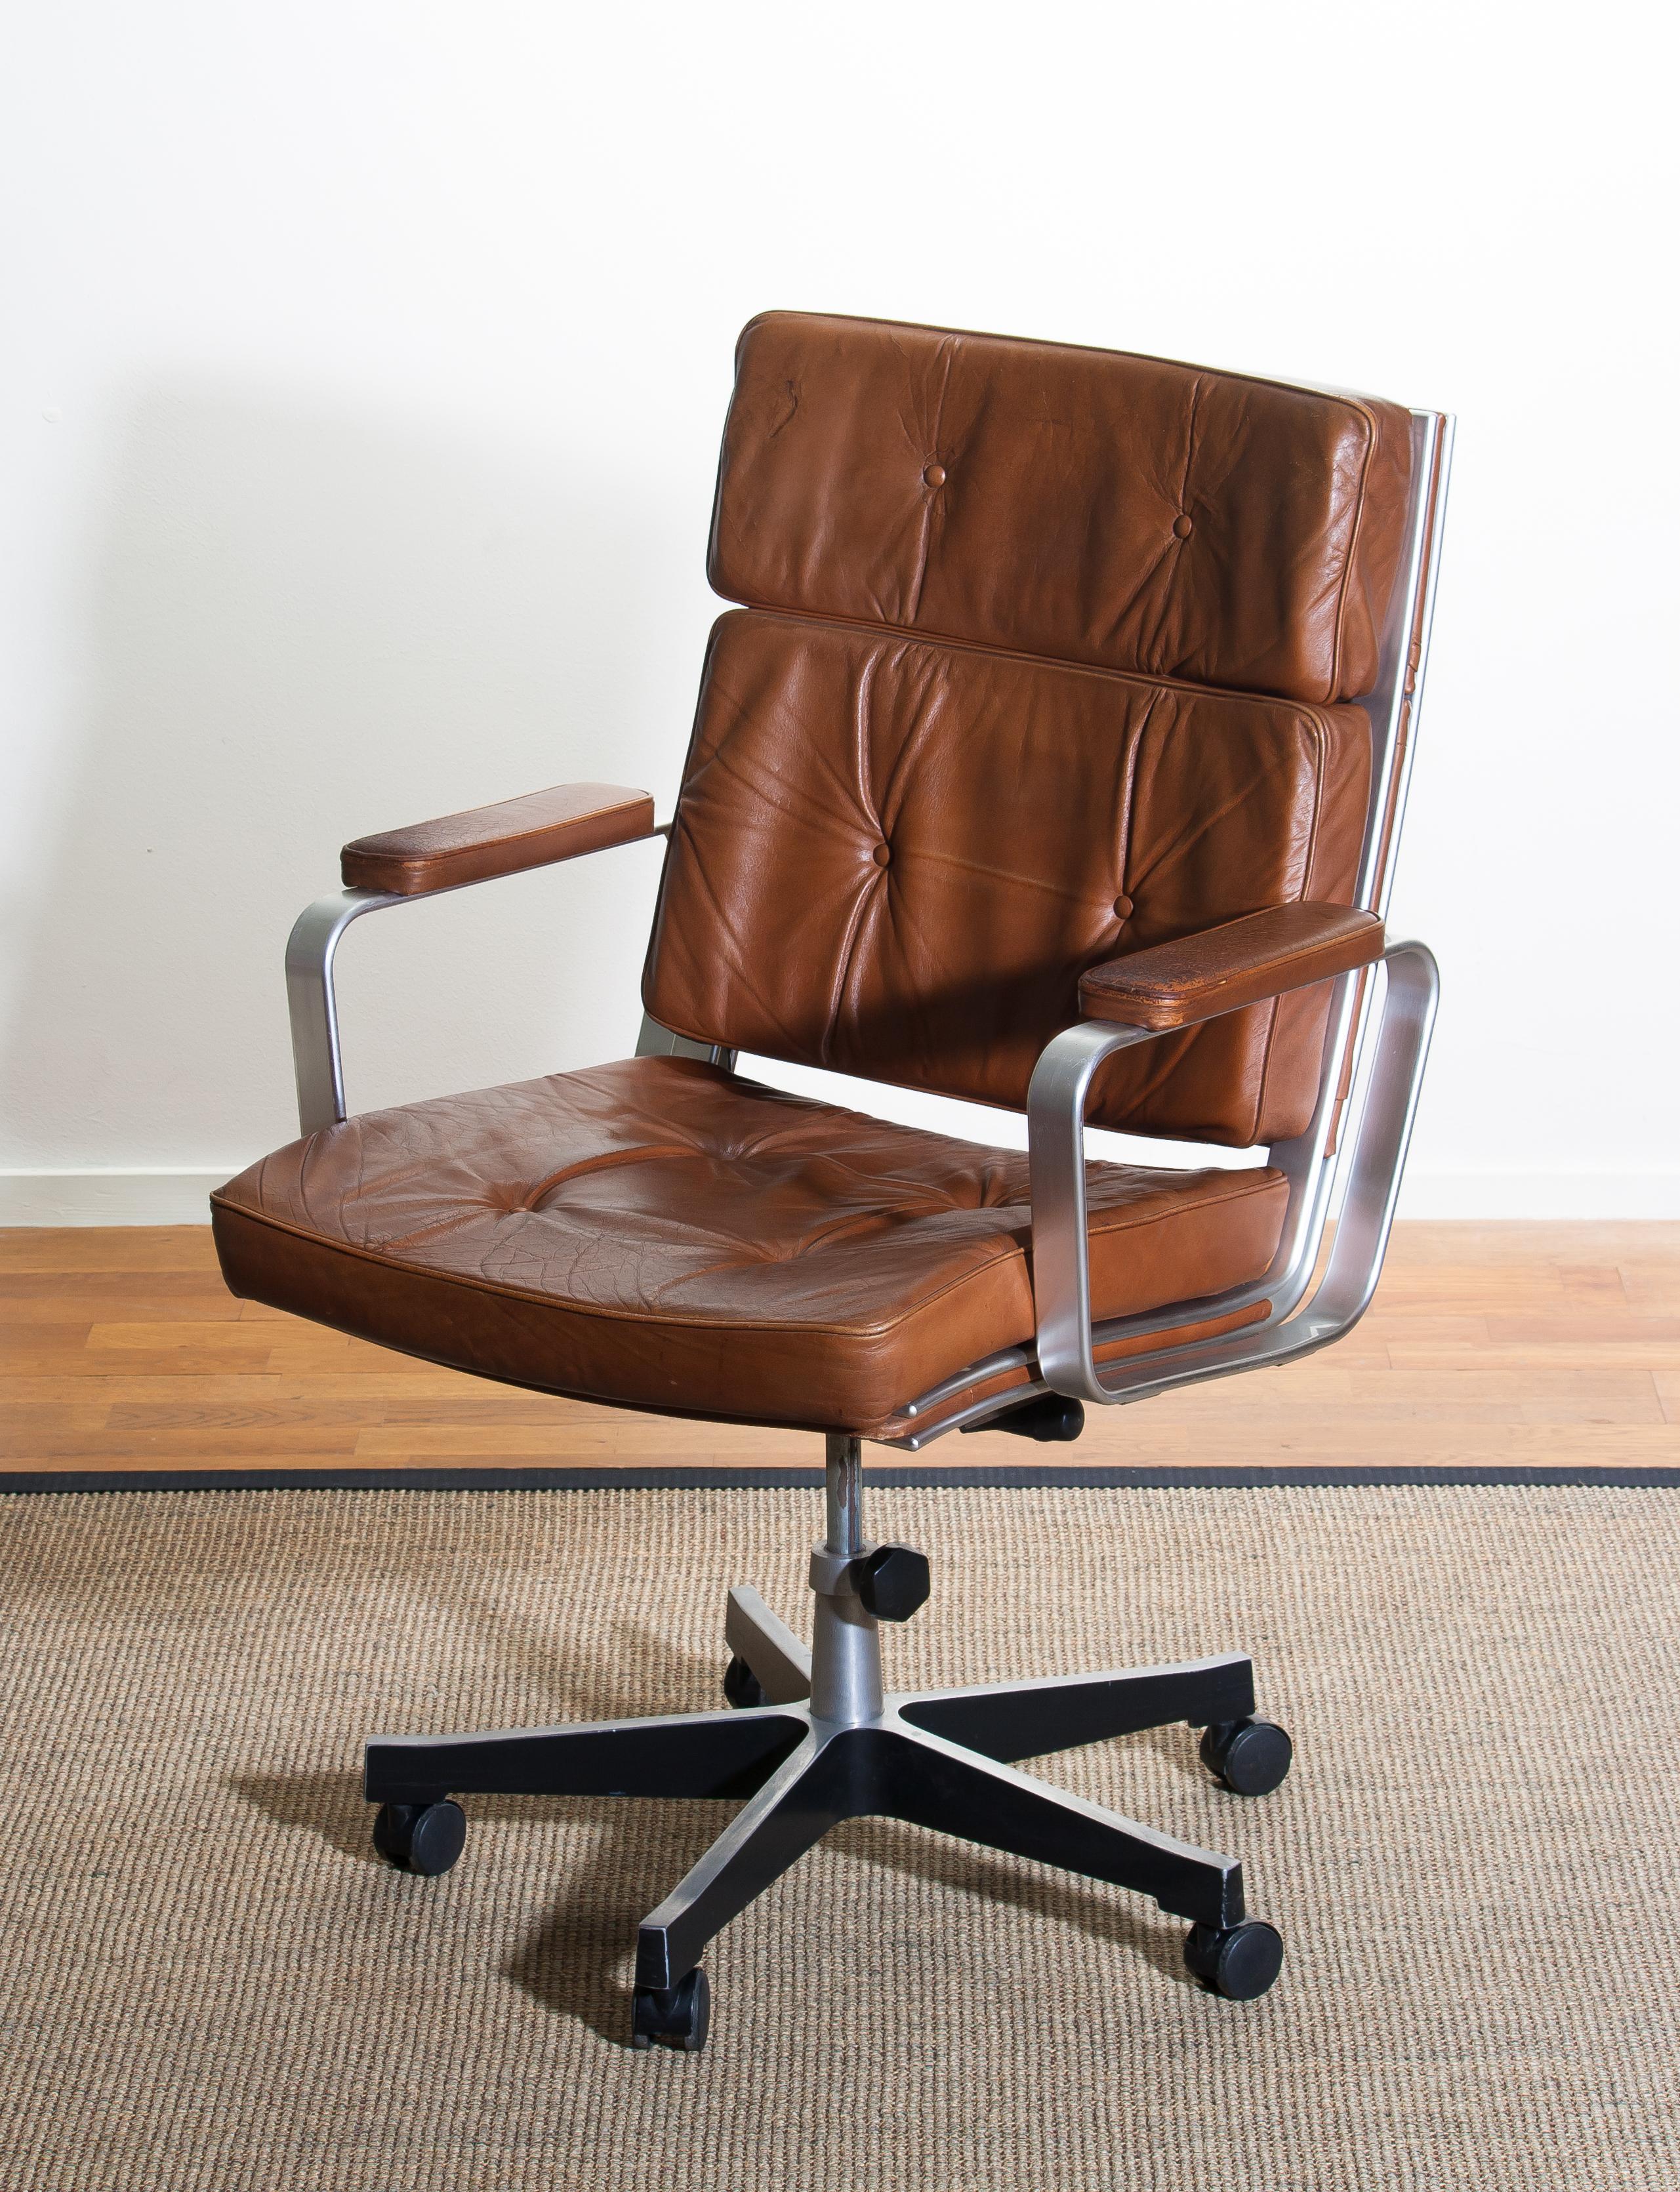 1970s, Brown Leather and Aluminum Desk Chair by Karl Erik Ekselius for Joc 1